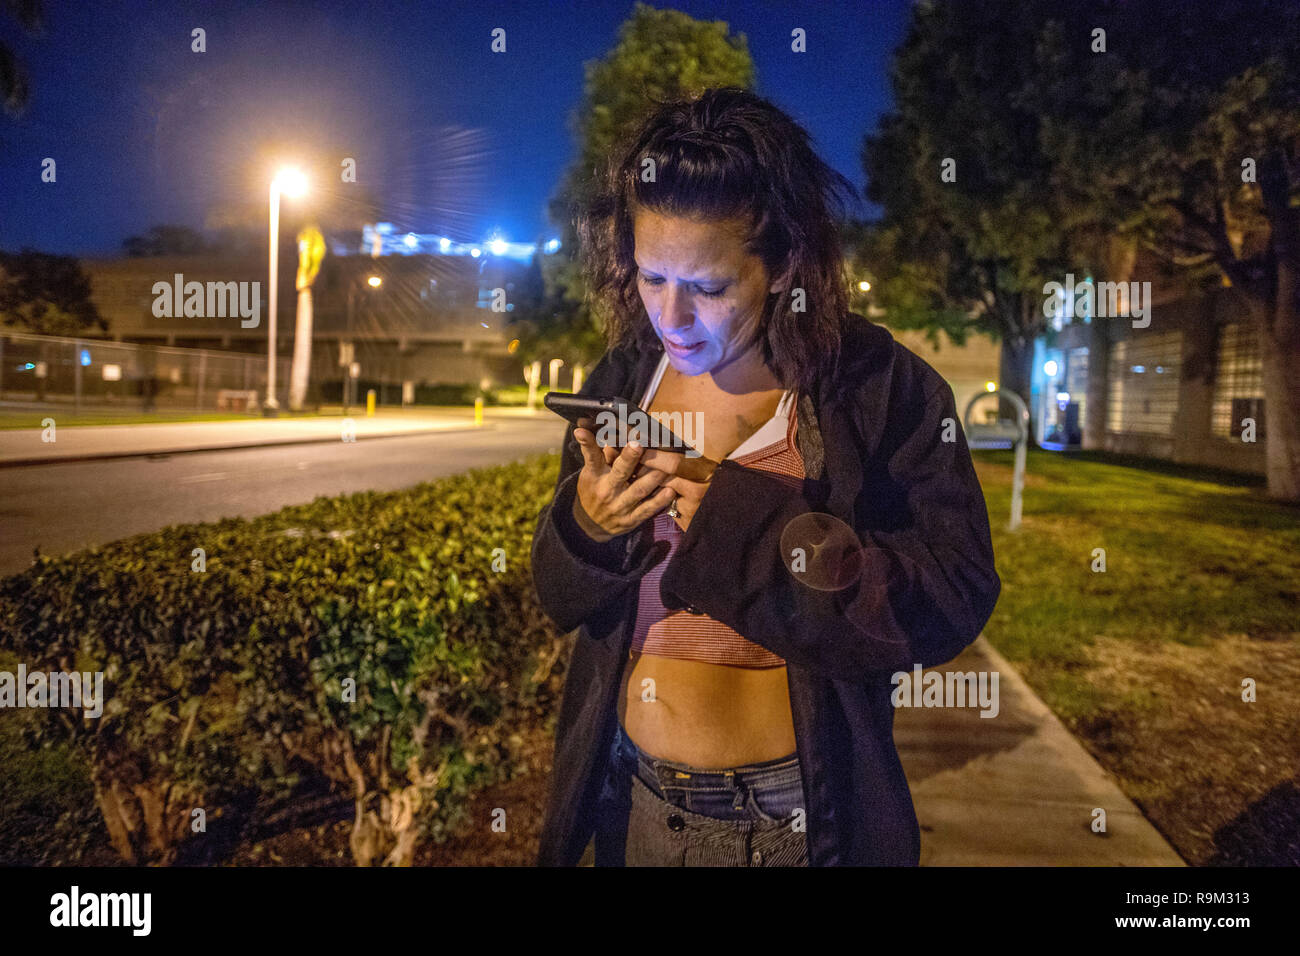 An released county jail inmate uses a donated charity cell phone to call for a ride at night in Santa Ana, CA. Stock Photo